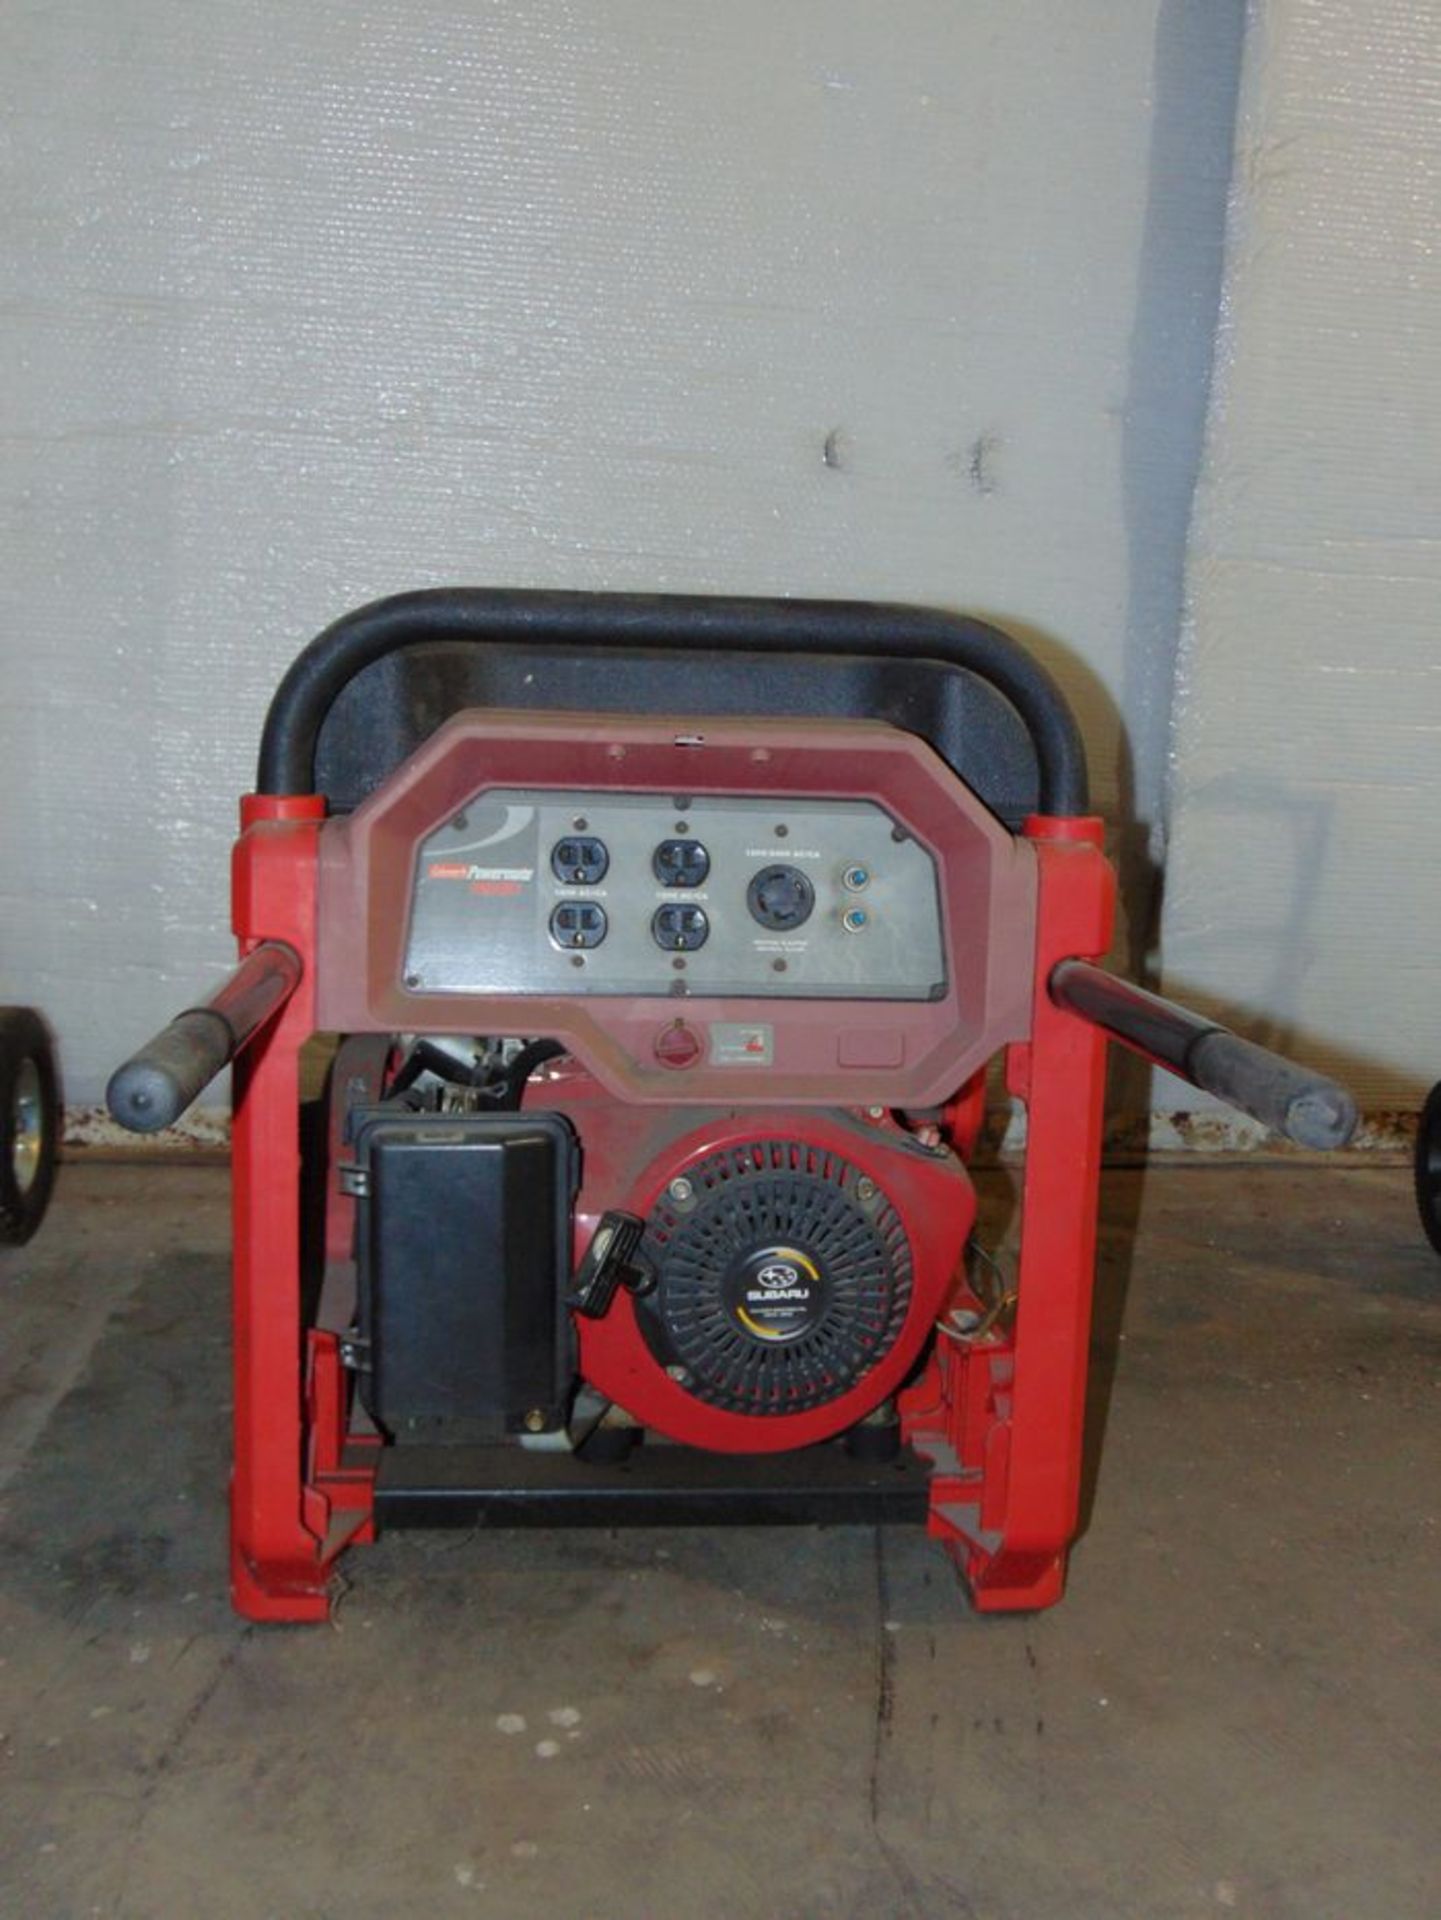 Generator: 120/240v, 6560w, 60hz, Ph1, 3600rpm, 43.8/21.9a , S/N: 96460830, Located At: 2222 Poydras - Image 2 of 4